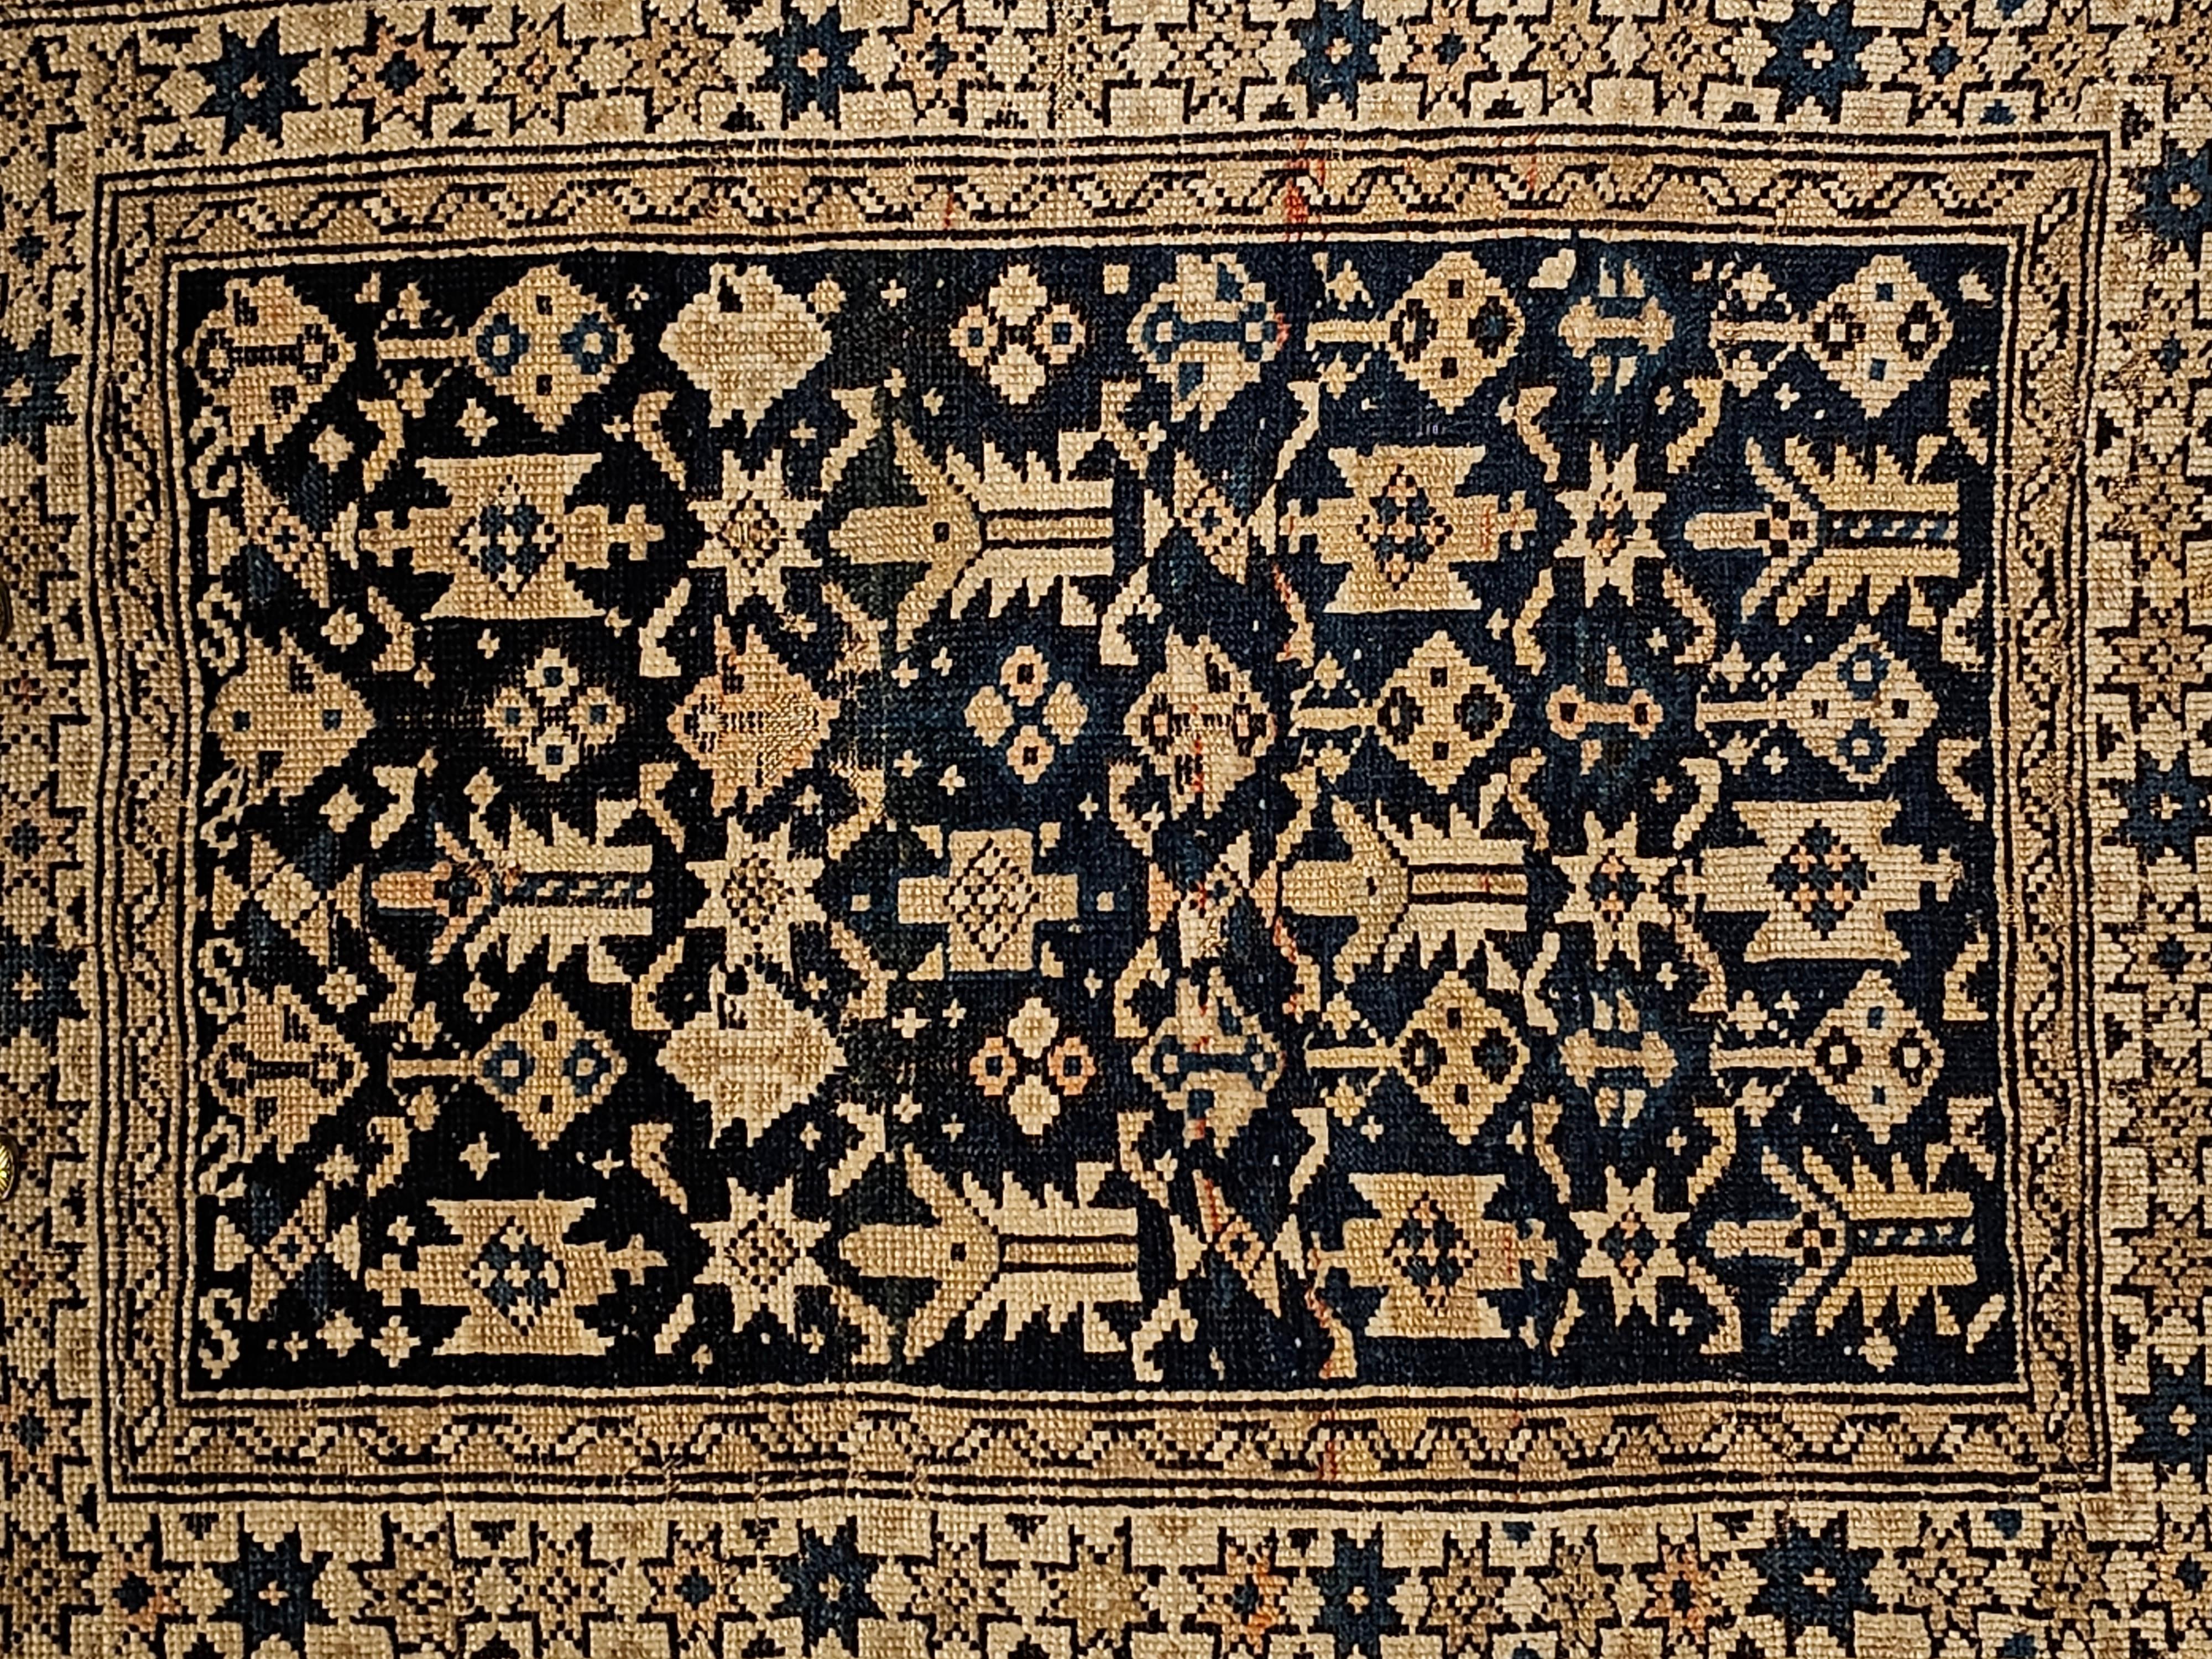 A beautiful Caucasian Shirvan area rug in allover design in abrash navy blue and ivory with design accent colors of pale yellow, French blue circa the 1880s.  The rare small Shirvan rug could have been woven to be used as a bagface or a prayer rug. 